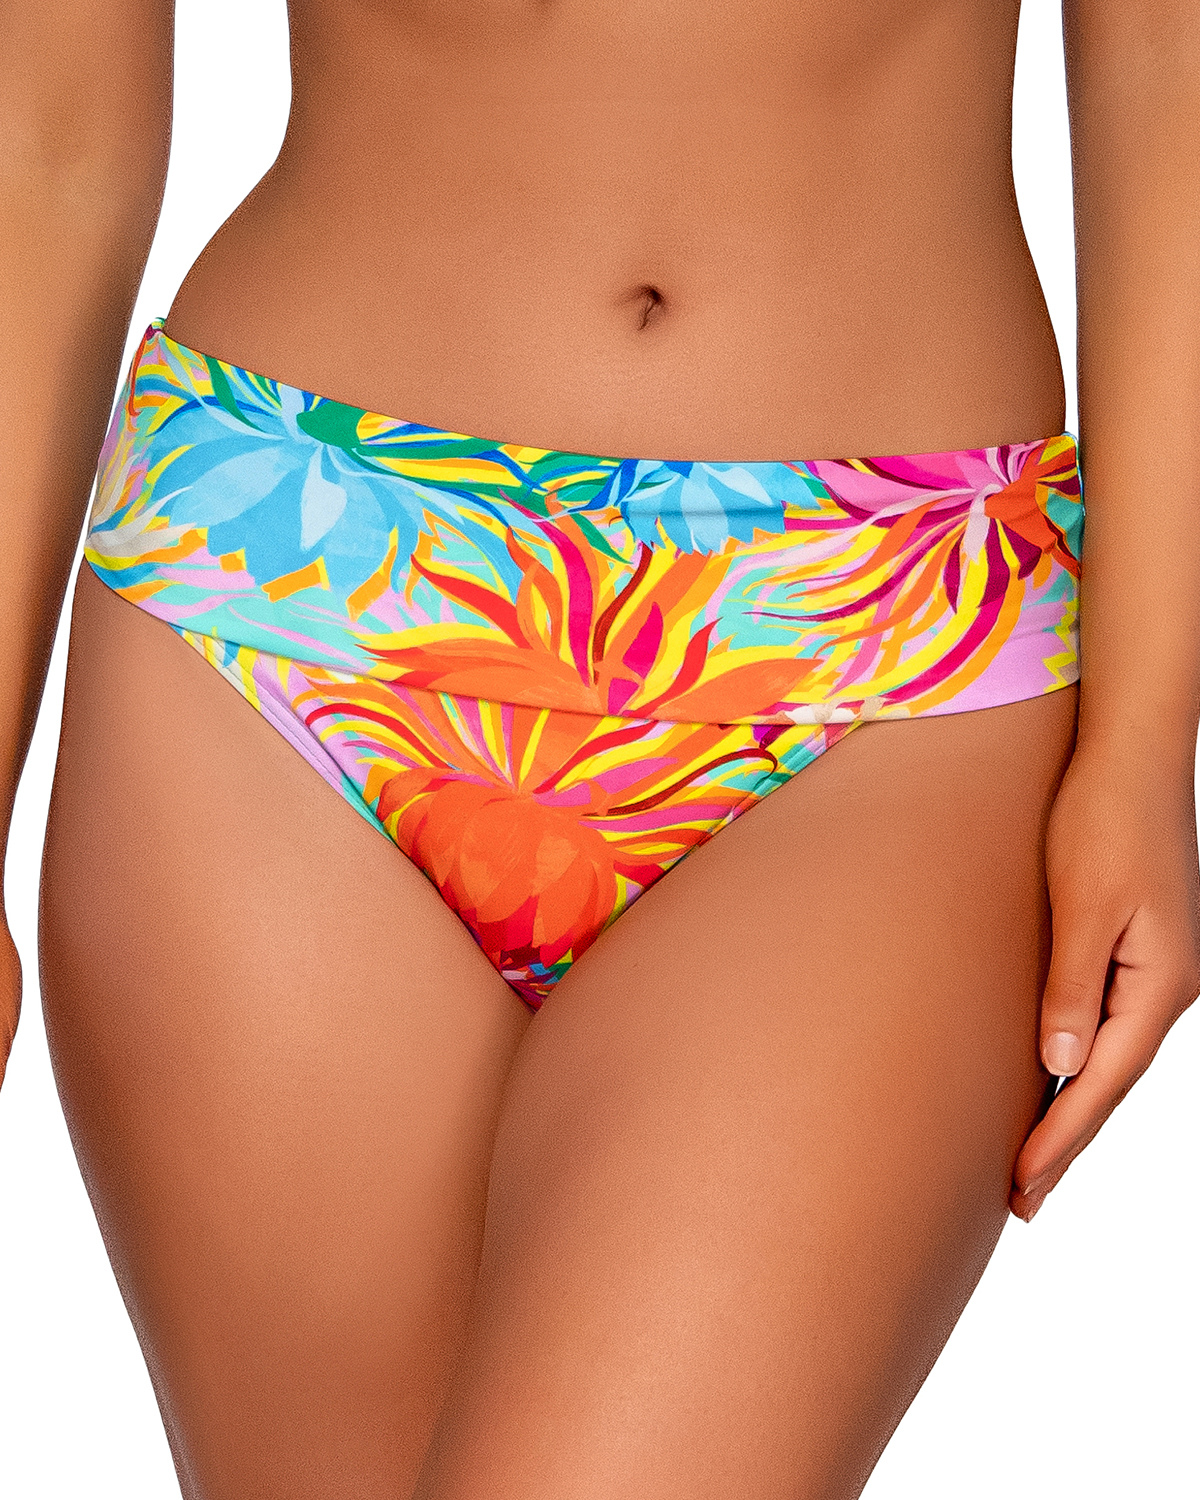 Model wearing a high waist fold over bottom in a orange, yellow, turquoise and pink floral print.